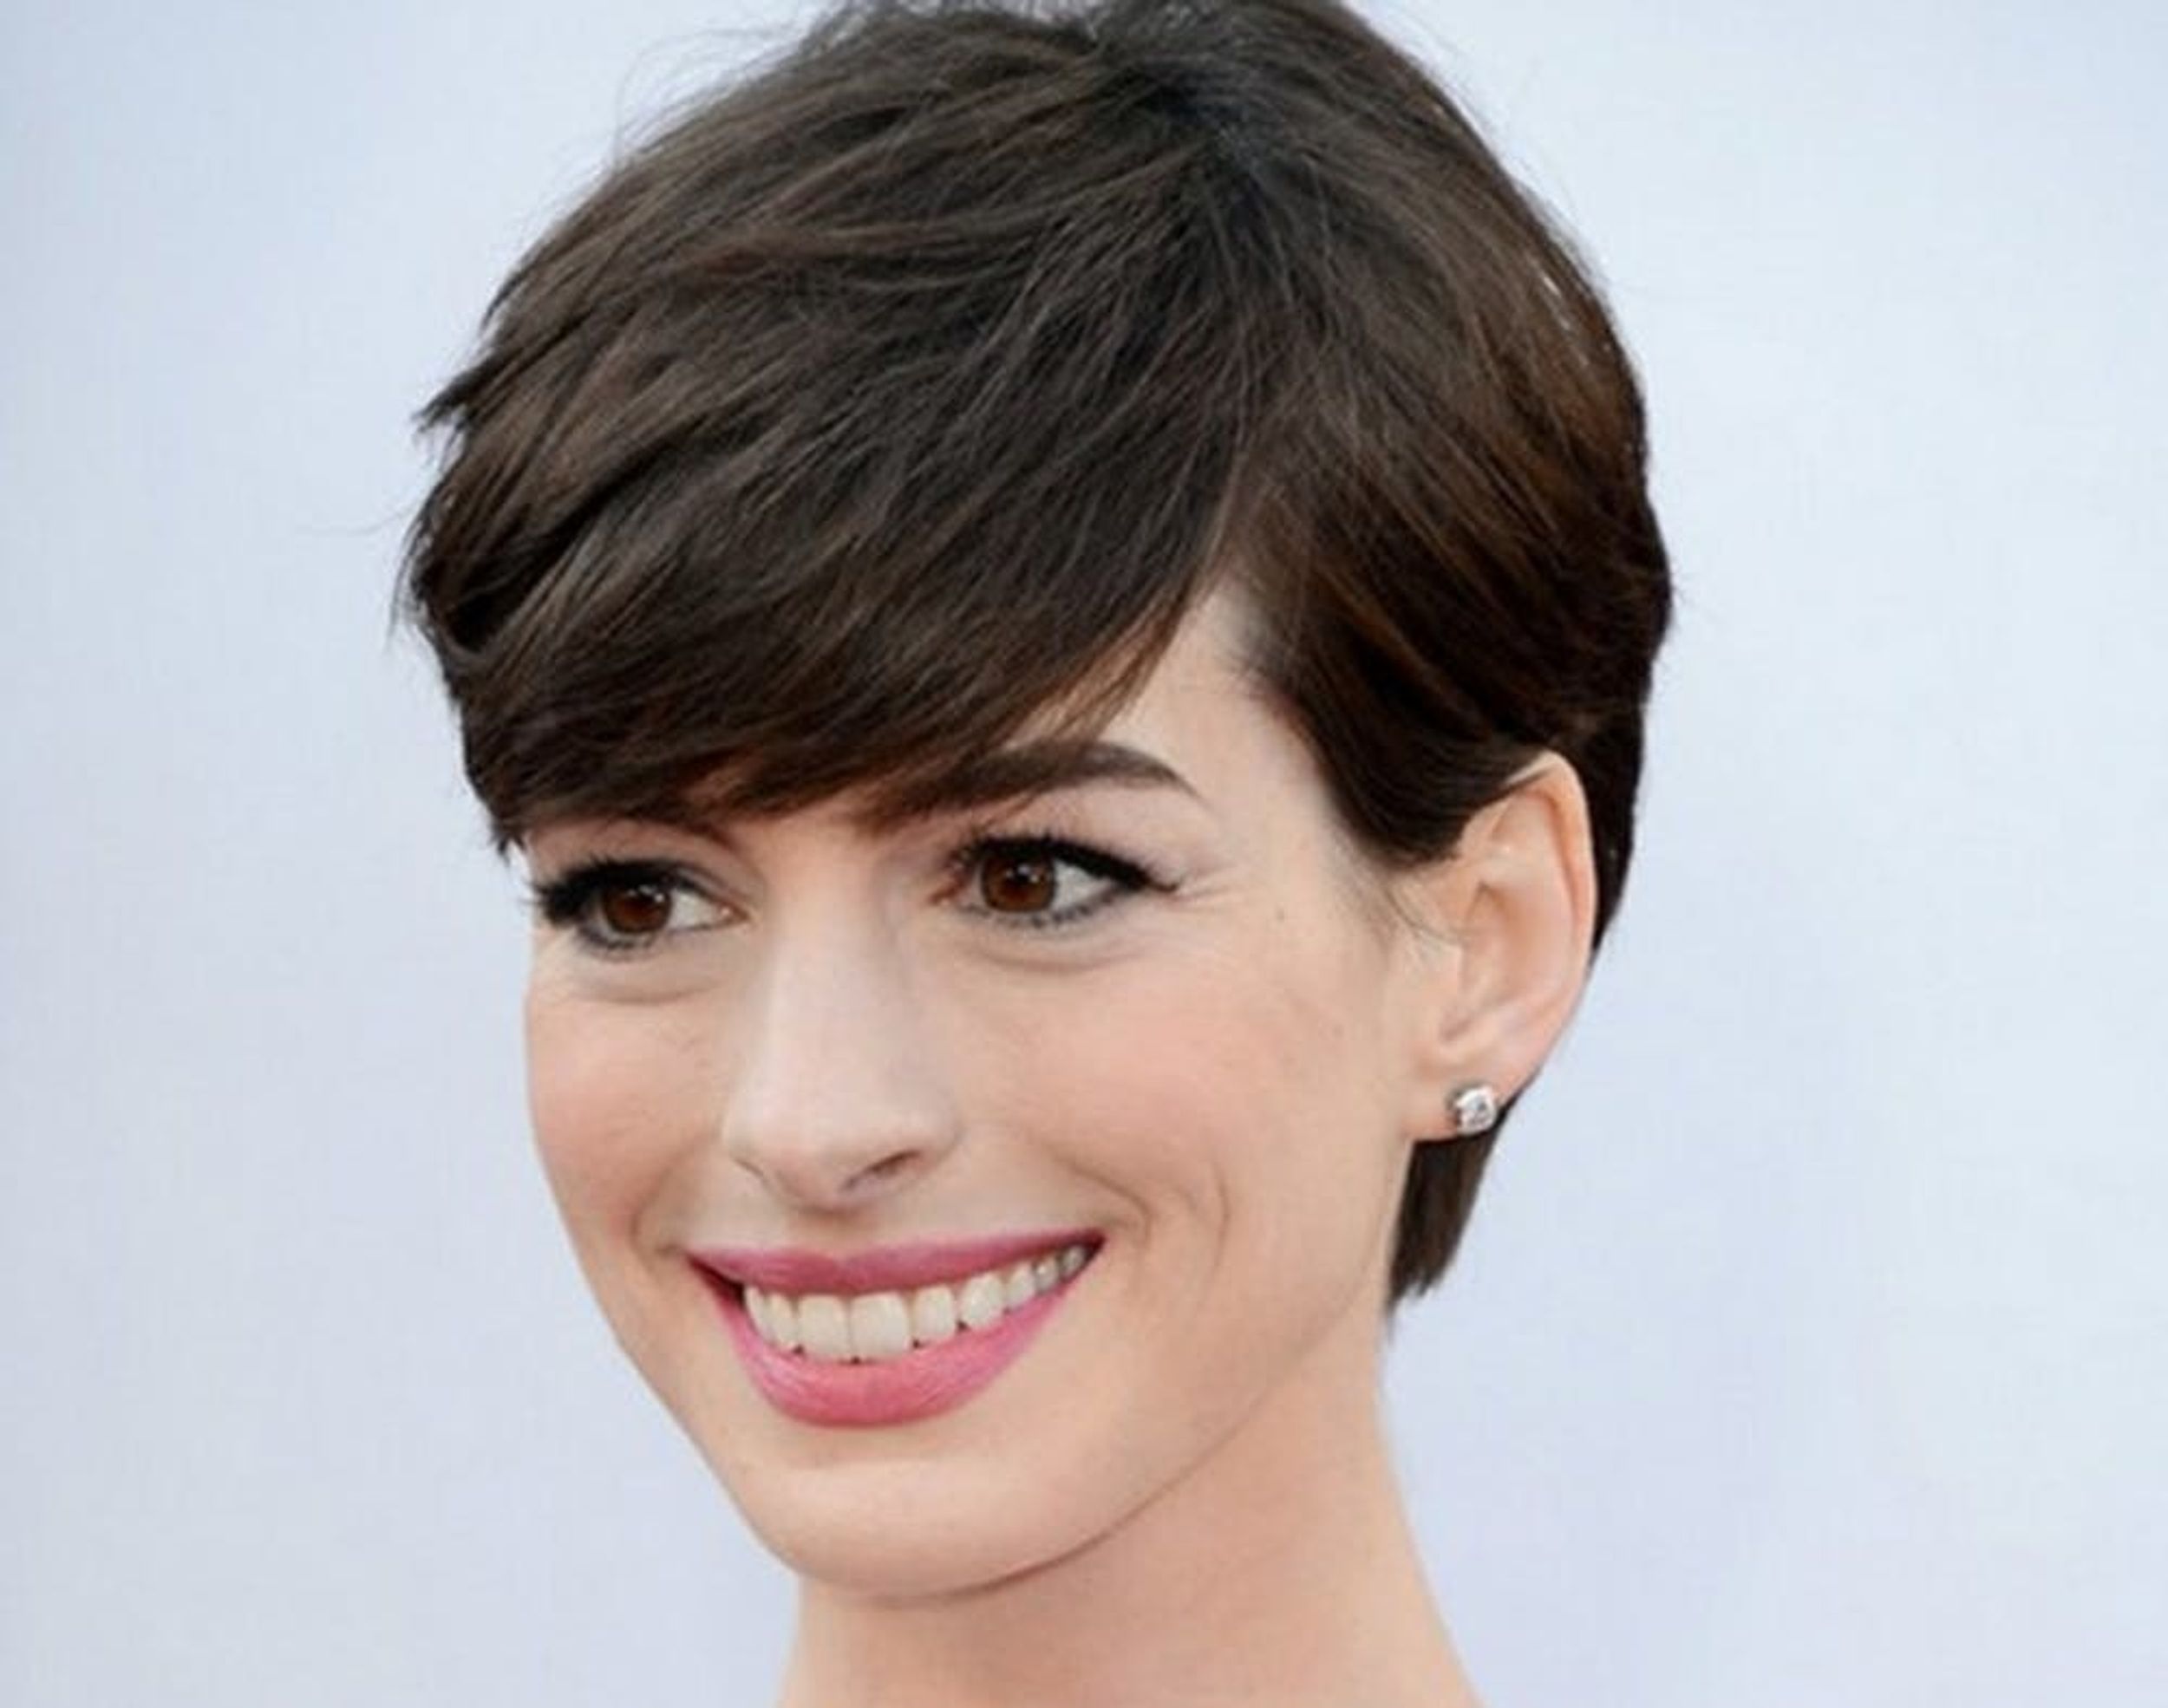 10 Pretty Ways to Grow Out Your Pixie Cut